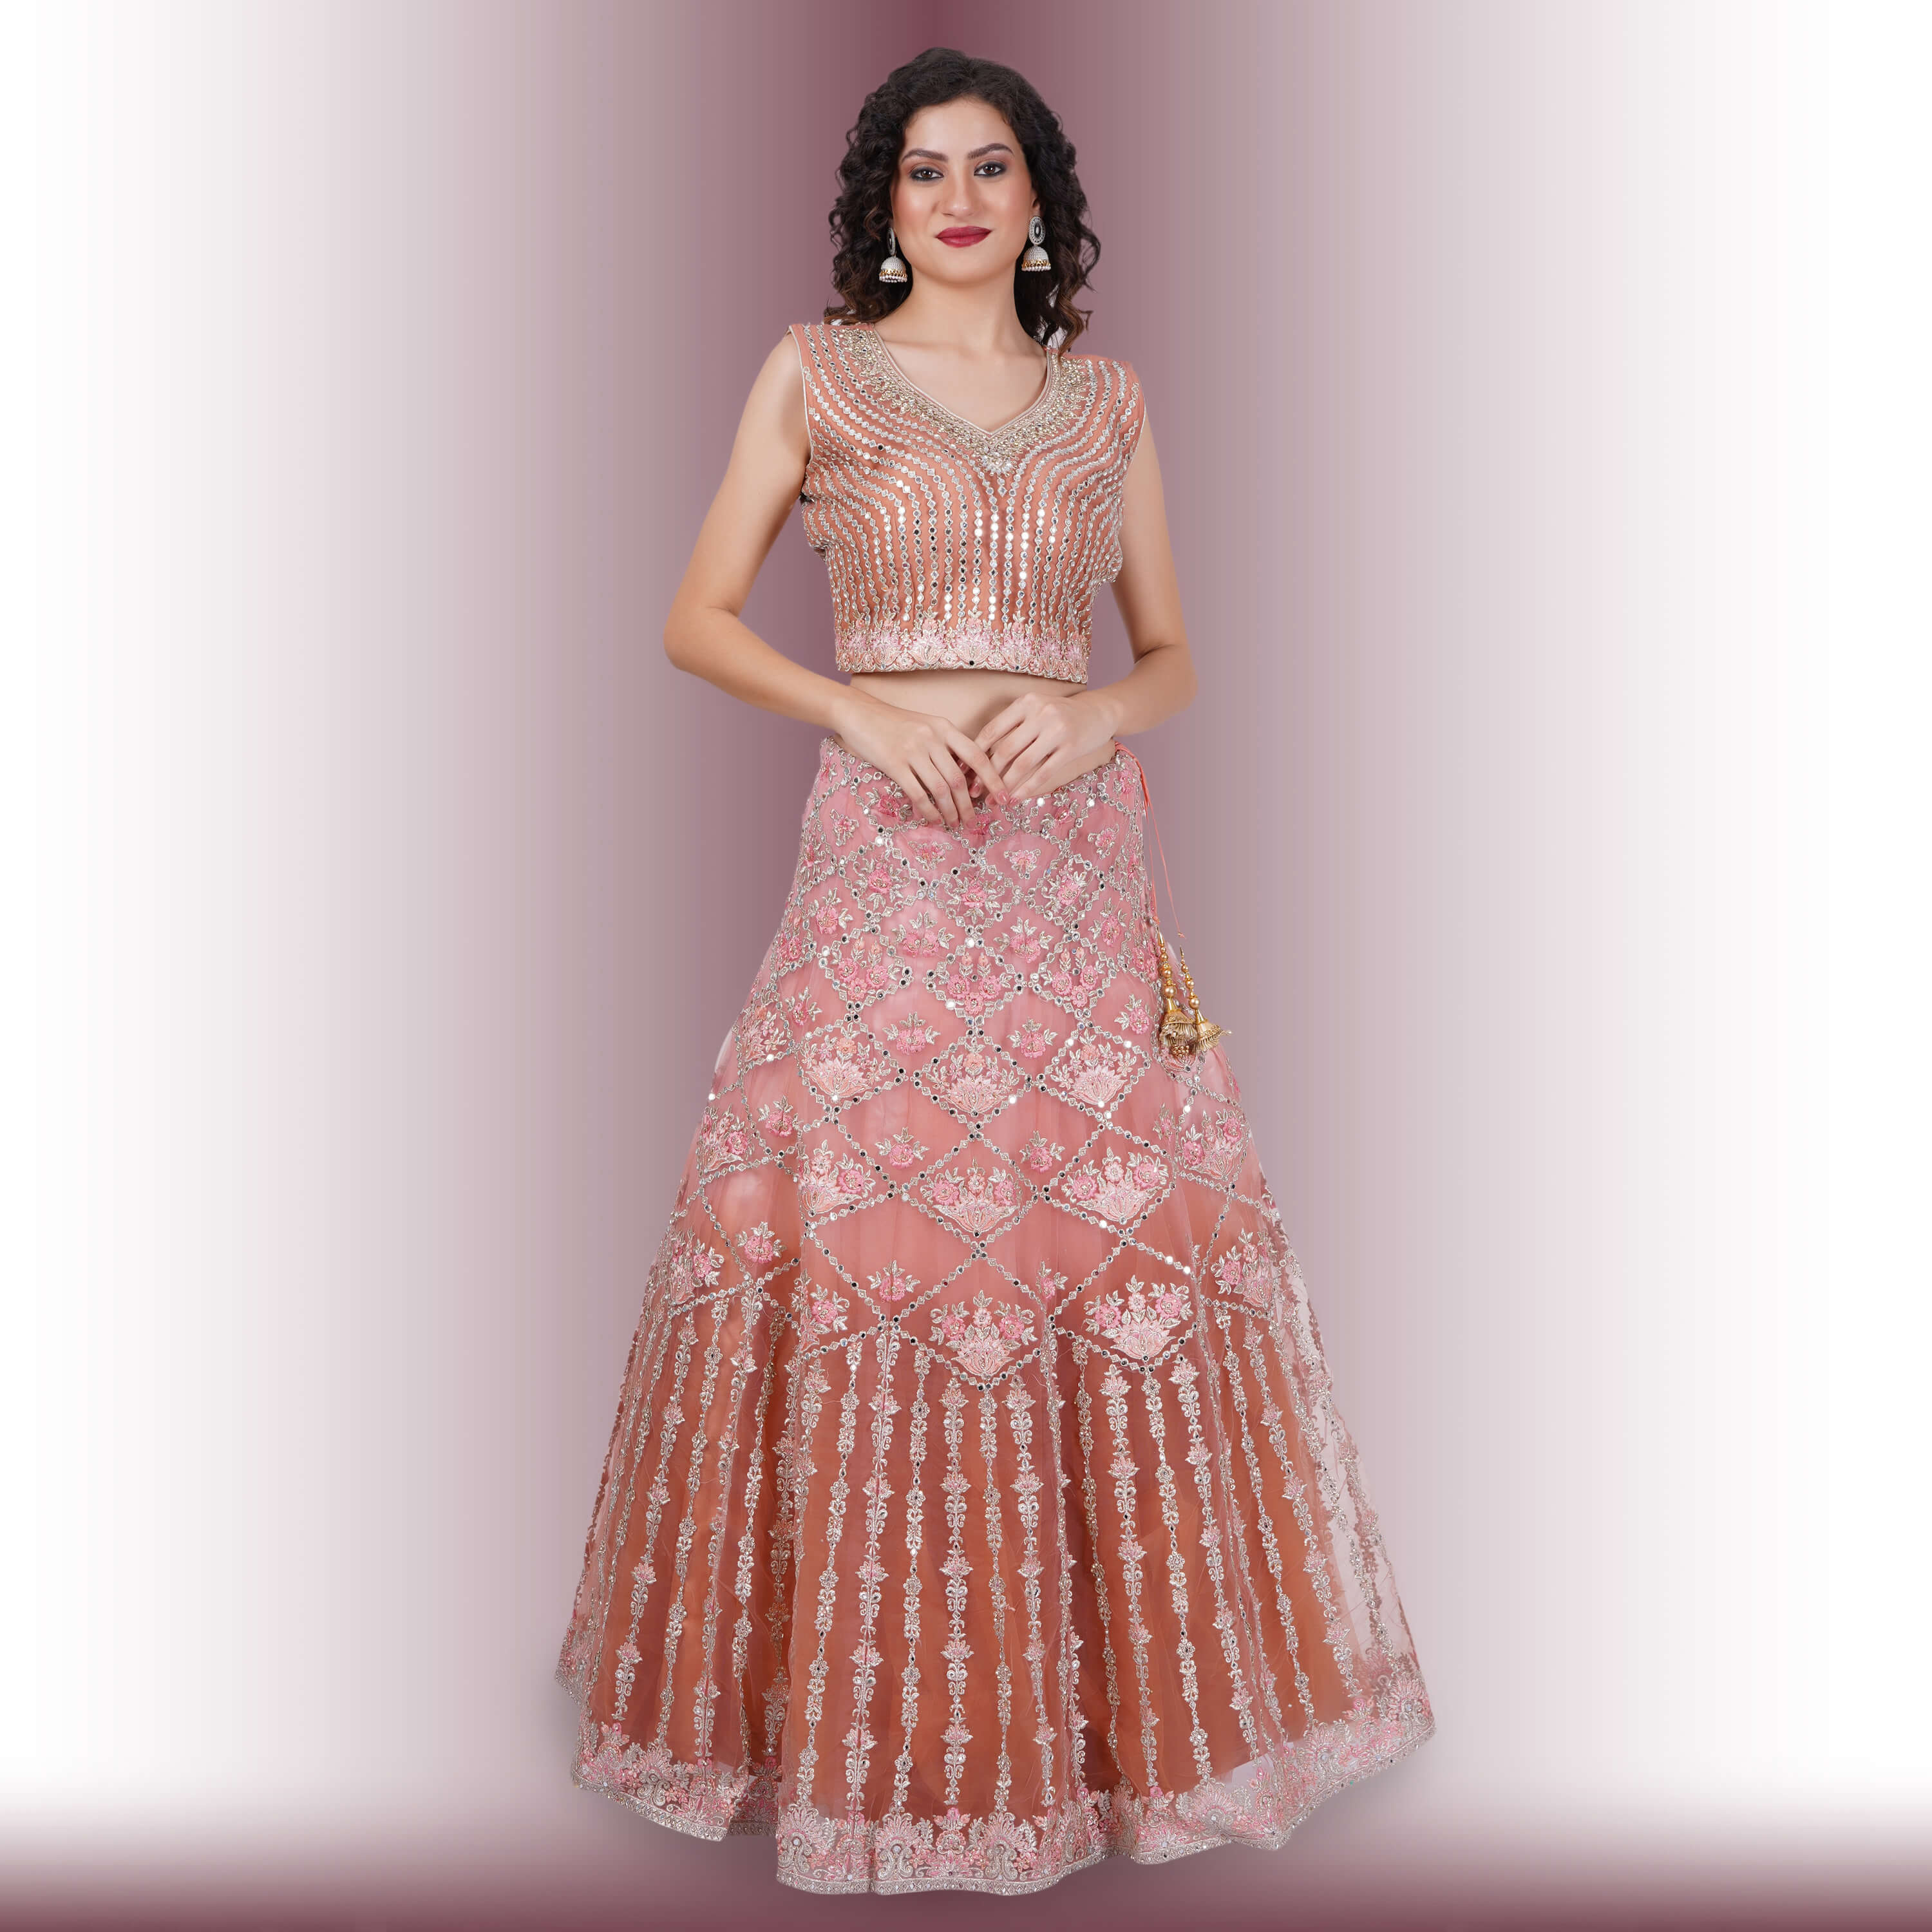 Would you pick an ombré lehenga for your wedding pheras? | Vogue India